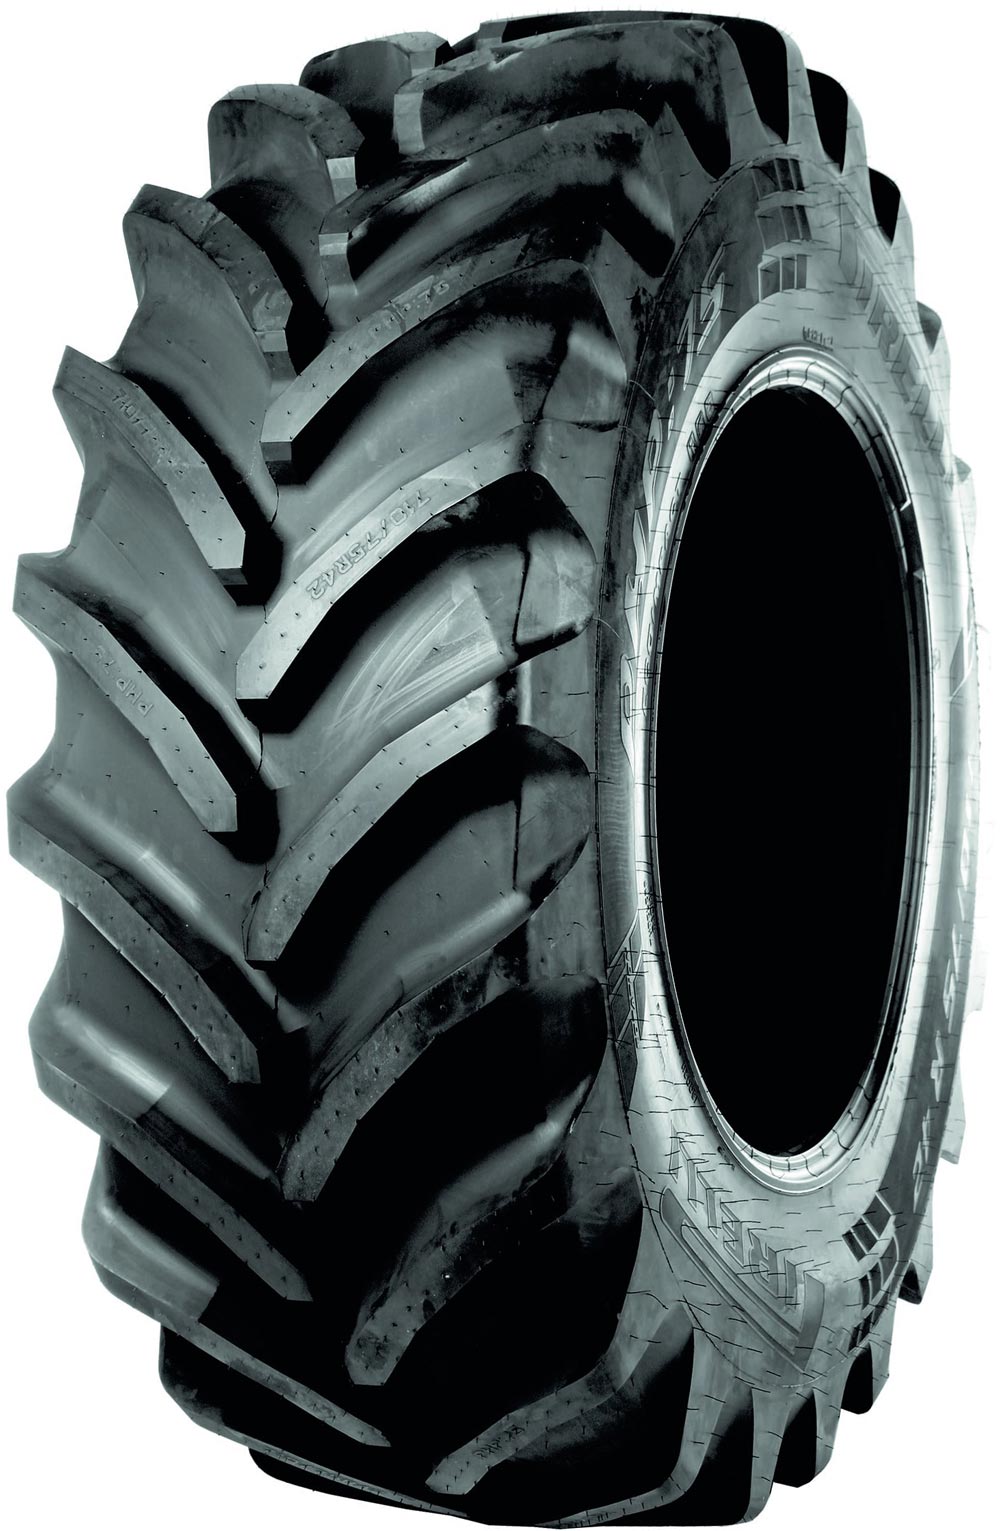 product_type-industrial_tires PIRELLI PHP:75 TL 650/75 R32 172D